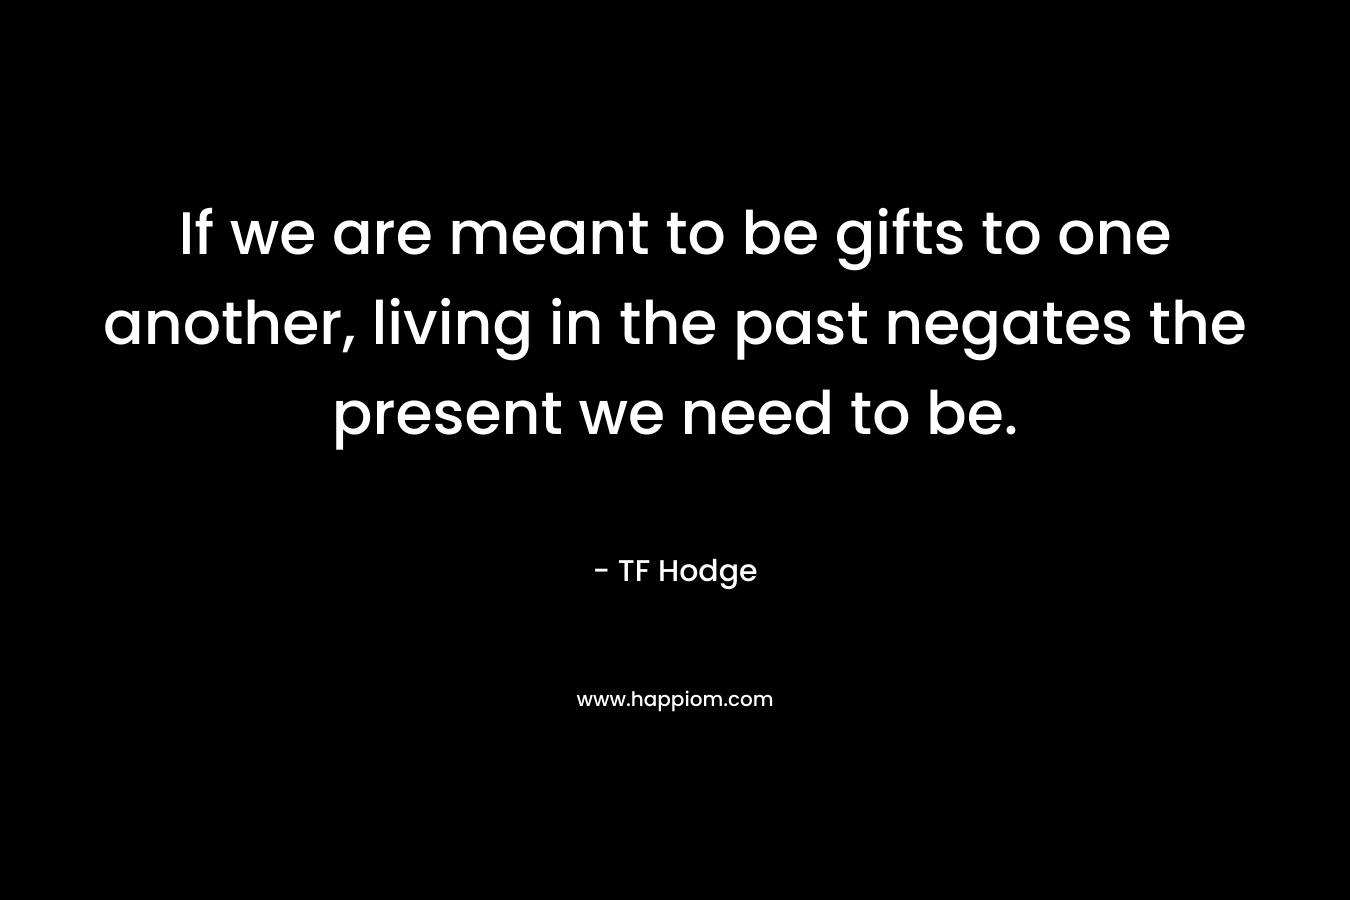 If we are meant to be gifts to one another, living in the past negates the present we need to be. – TF Hodge